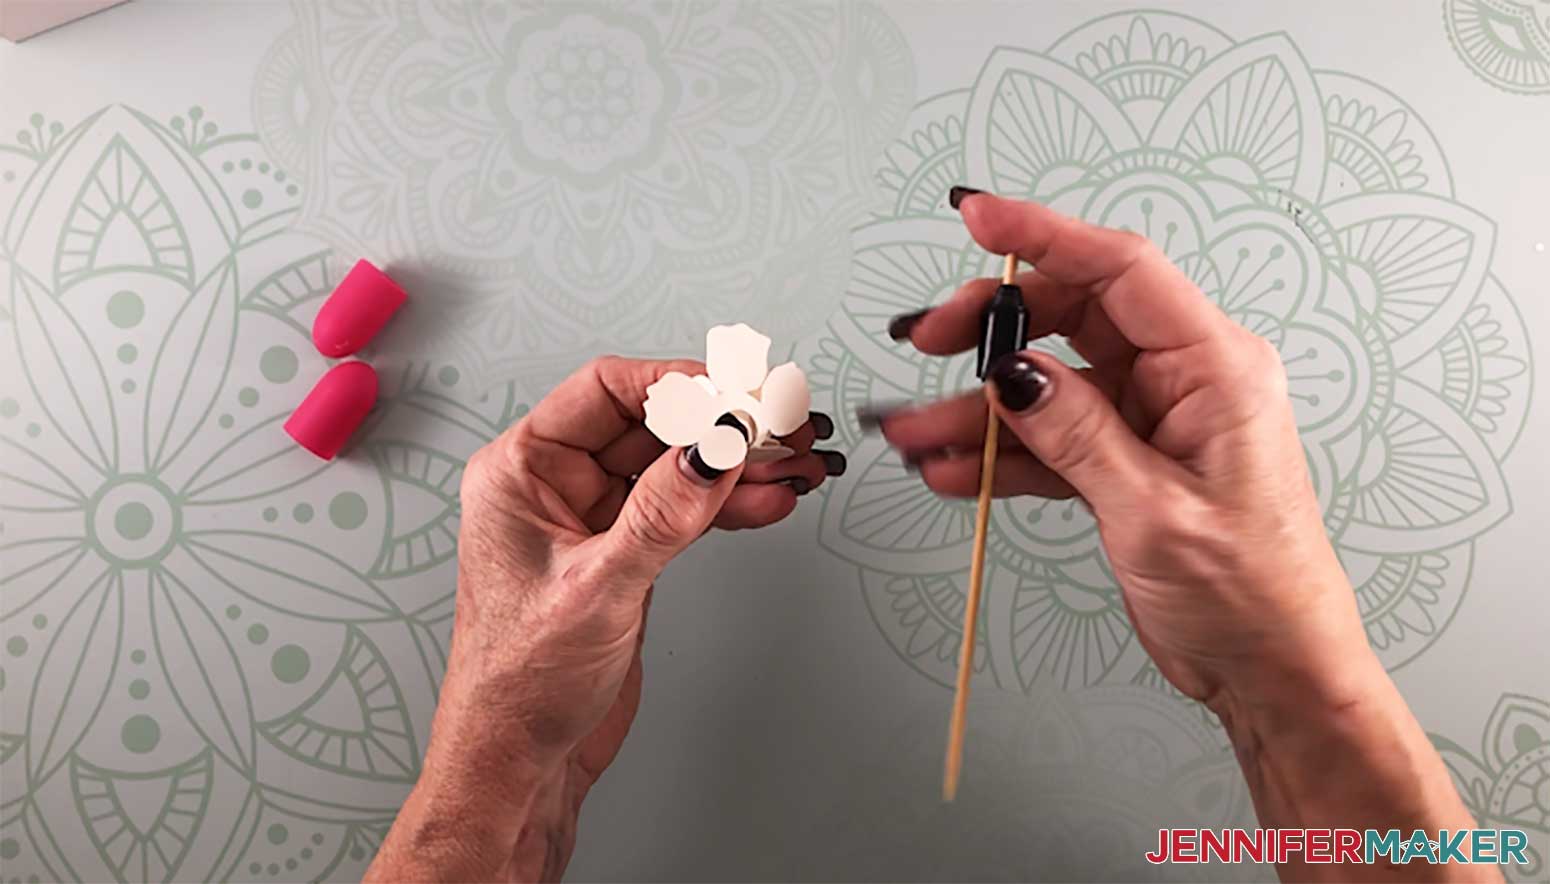 Rolling a paper rose with a DIY quilling tool to make a paper flower shadow box